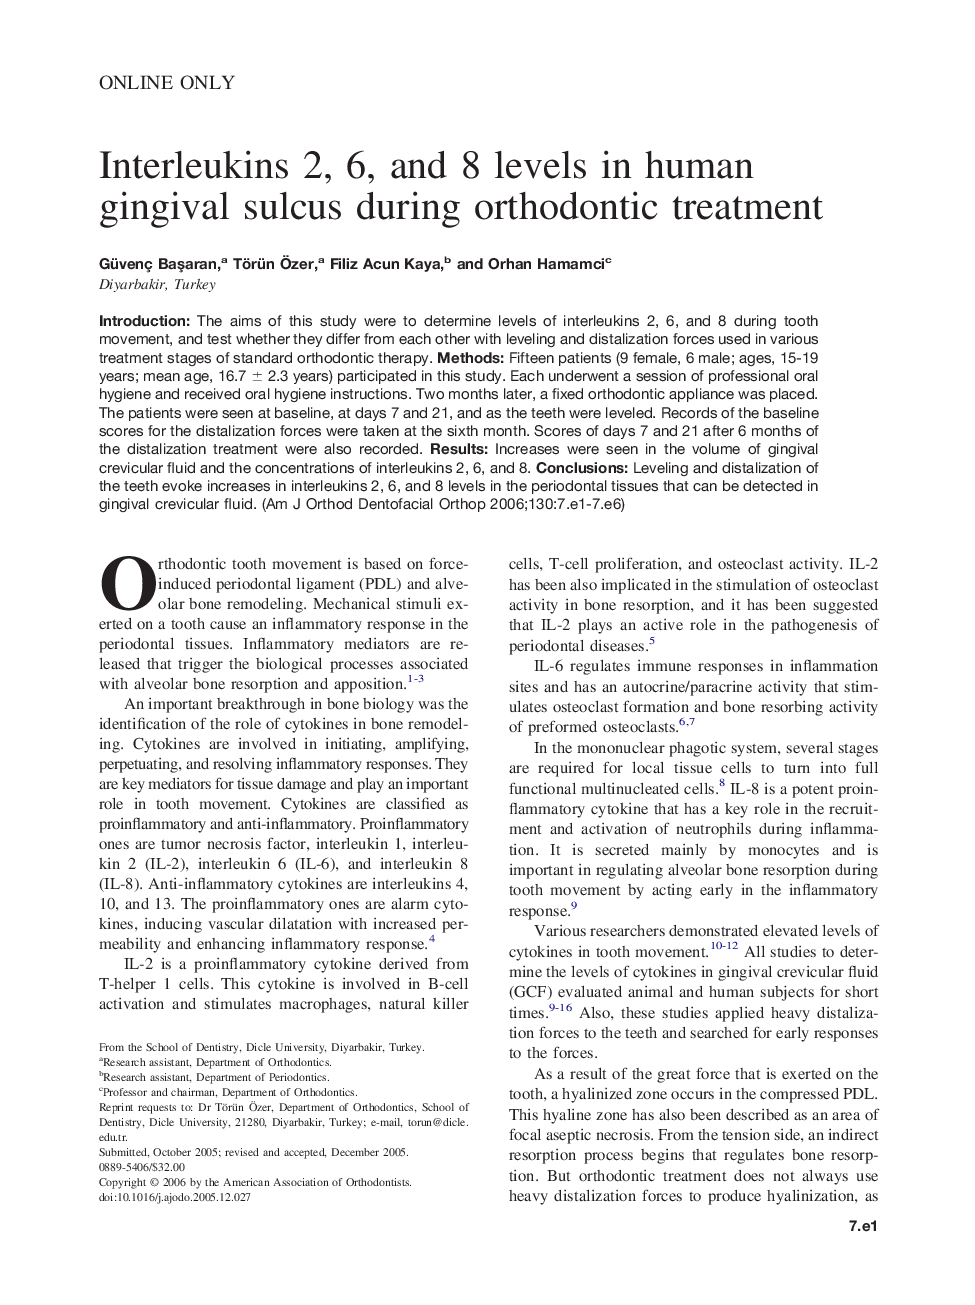 Interleukins 2, 6, and 8 levels in human gingival sulcus during orthodontic treatment